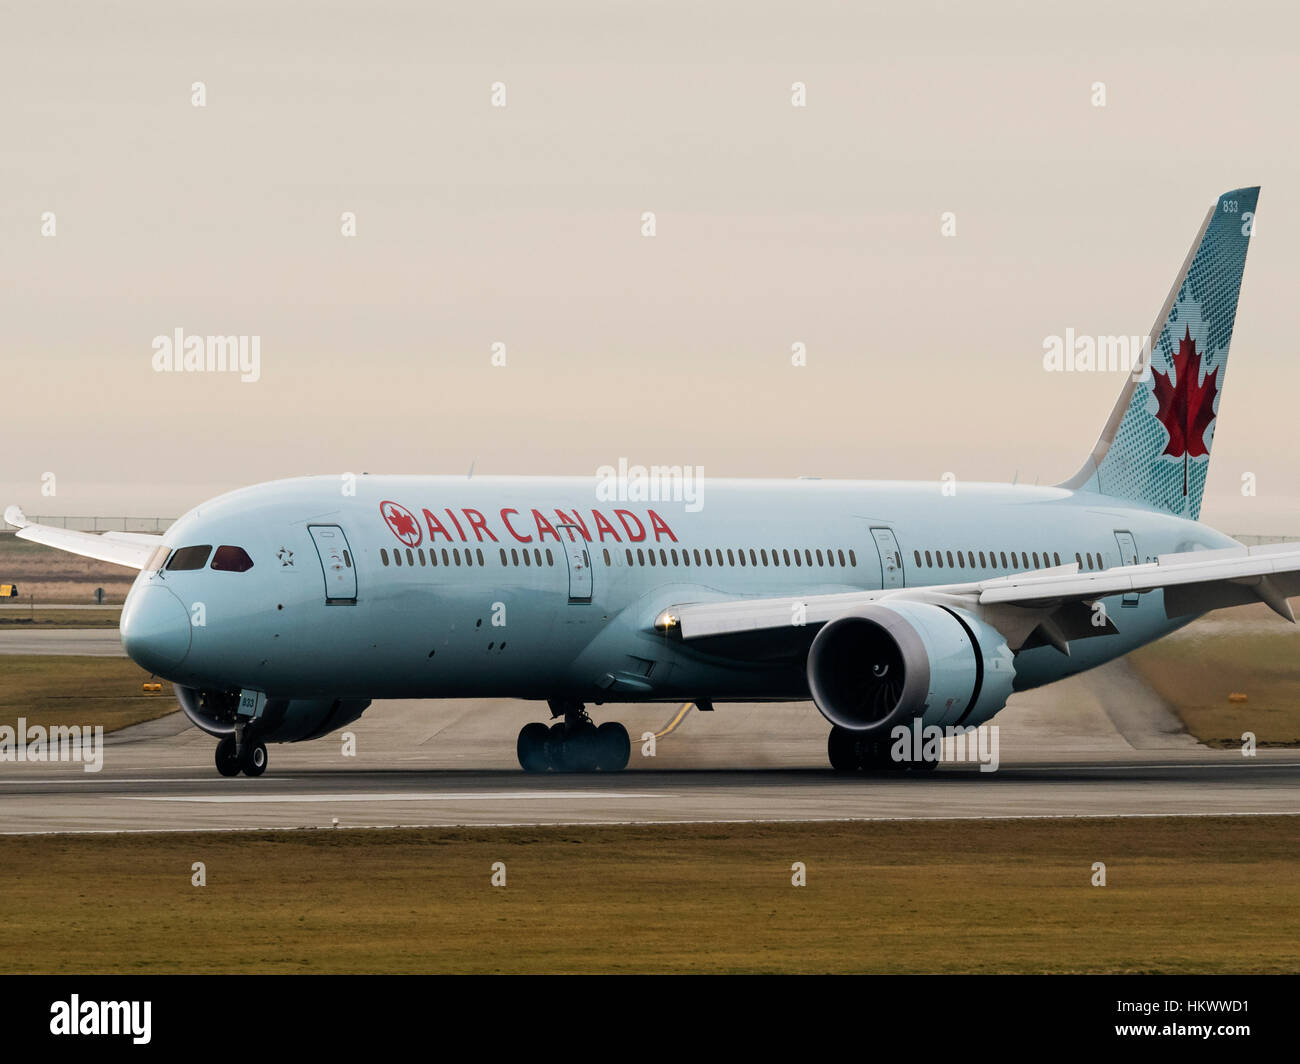 An Air Canada Boeing 787-9 Dreamliner wide-body jet airliner lands at Vancouver International Airport, Richmond, B.C., Canada Stock Photo